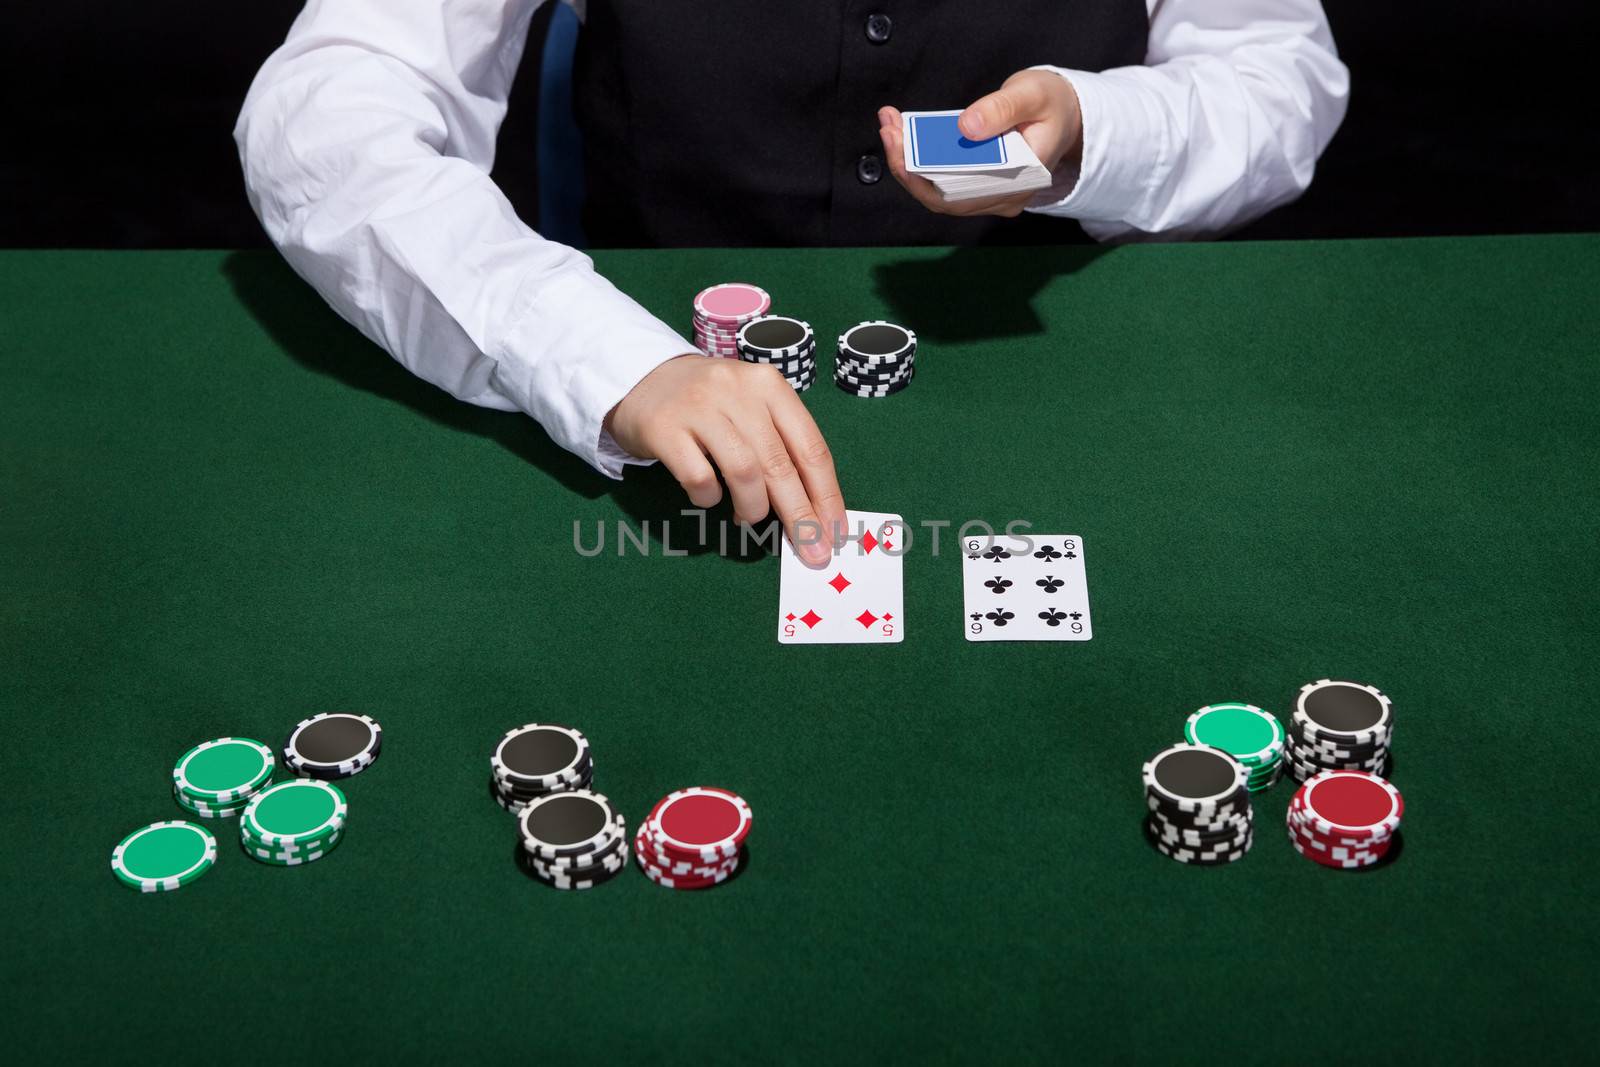 Croupier dealing cards in a poker game placing them face up on the green baize of the gaming table